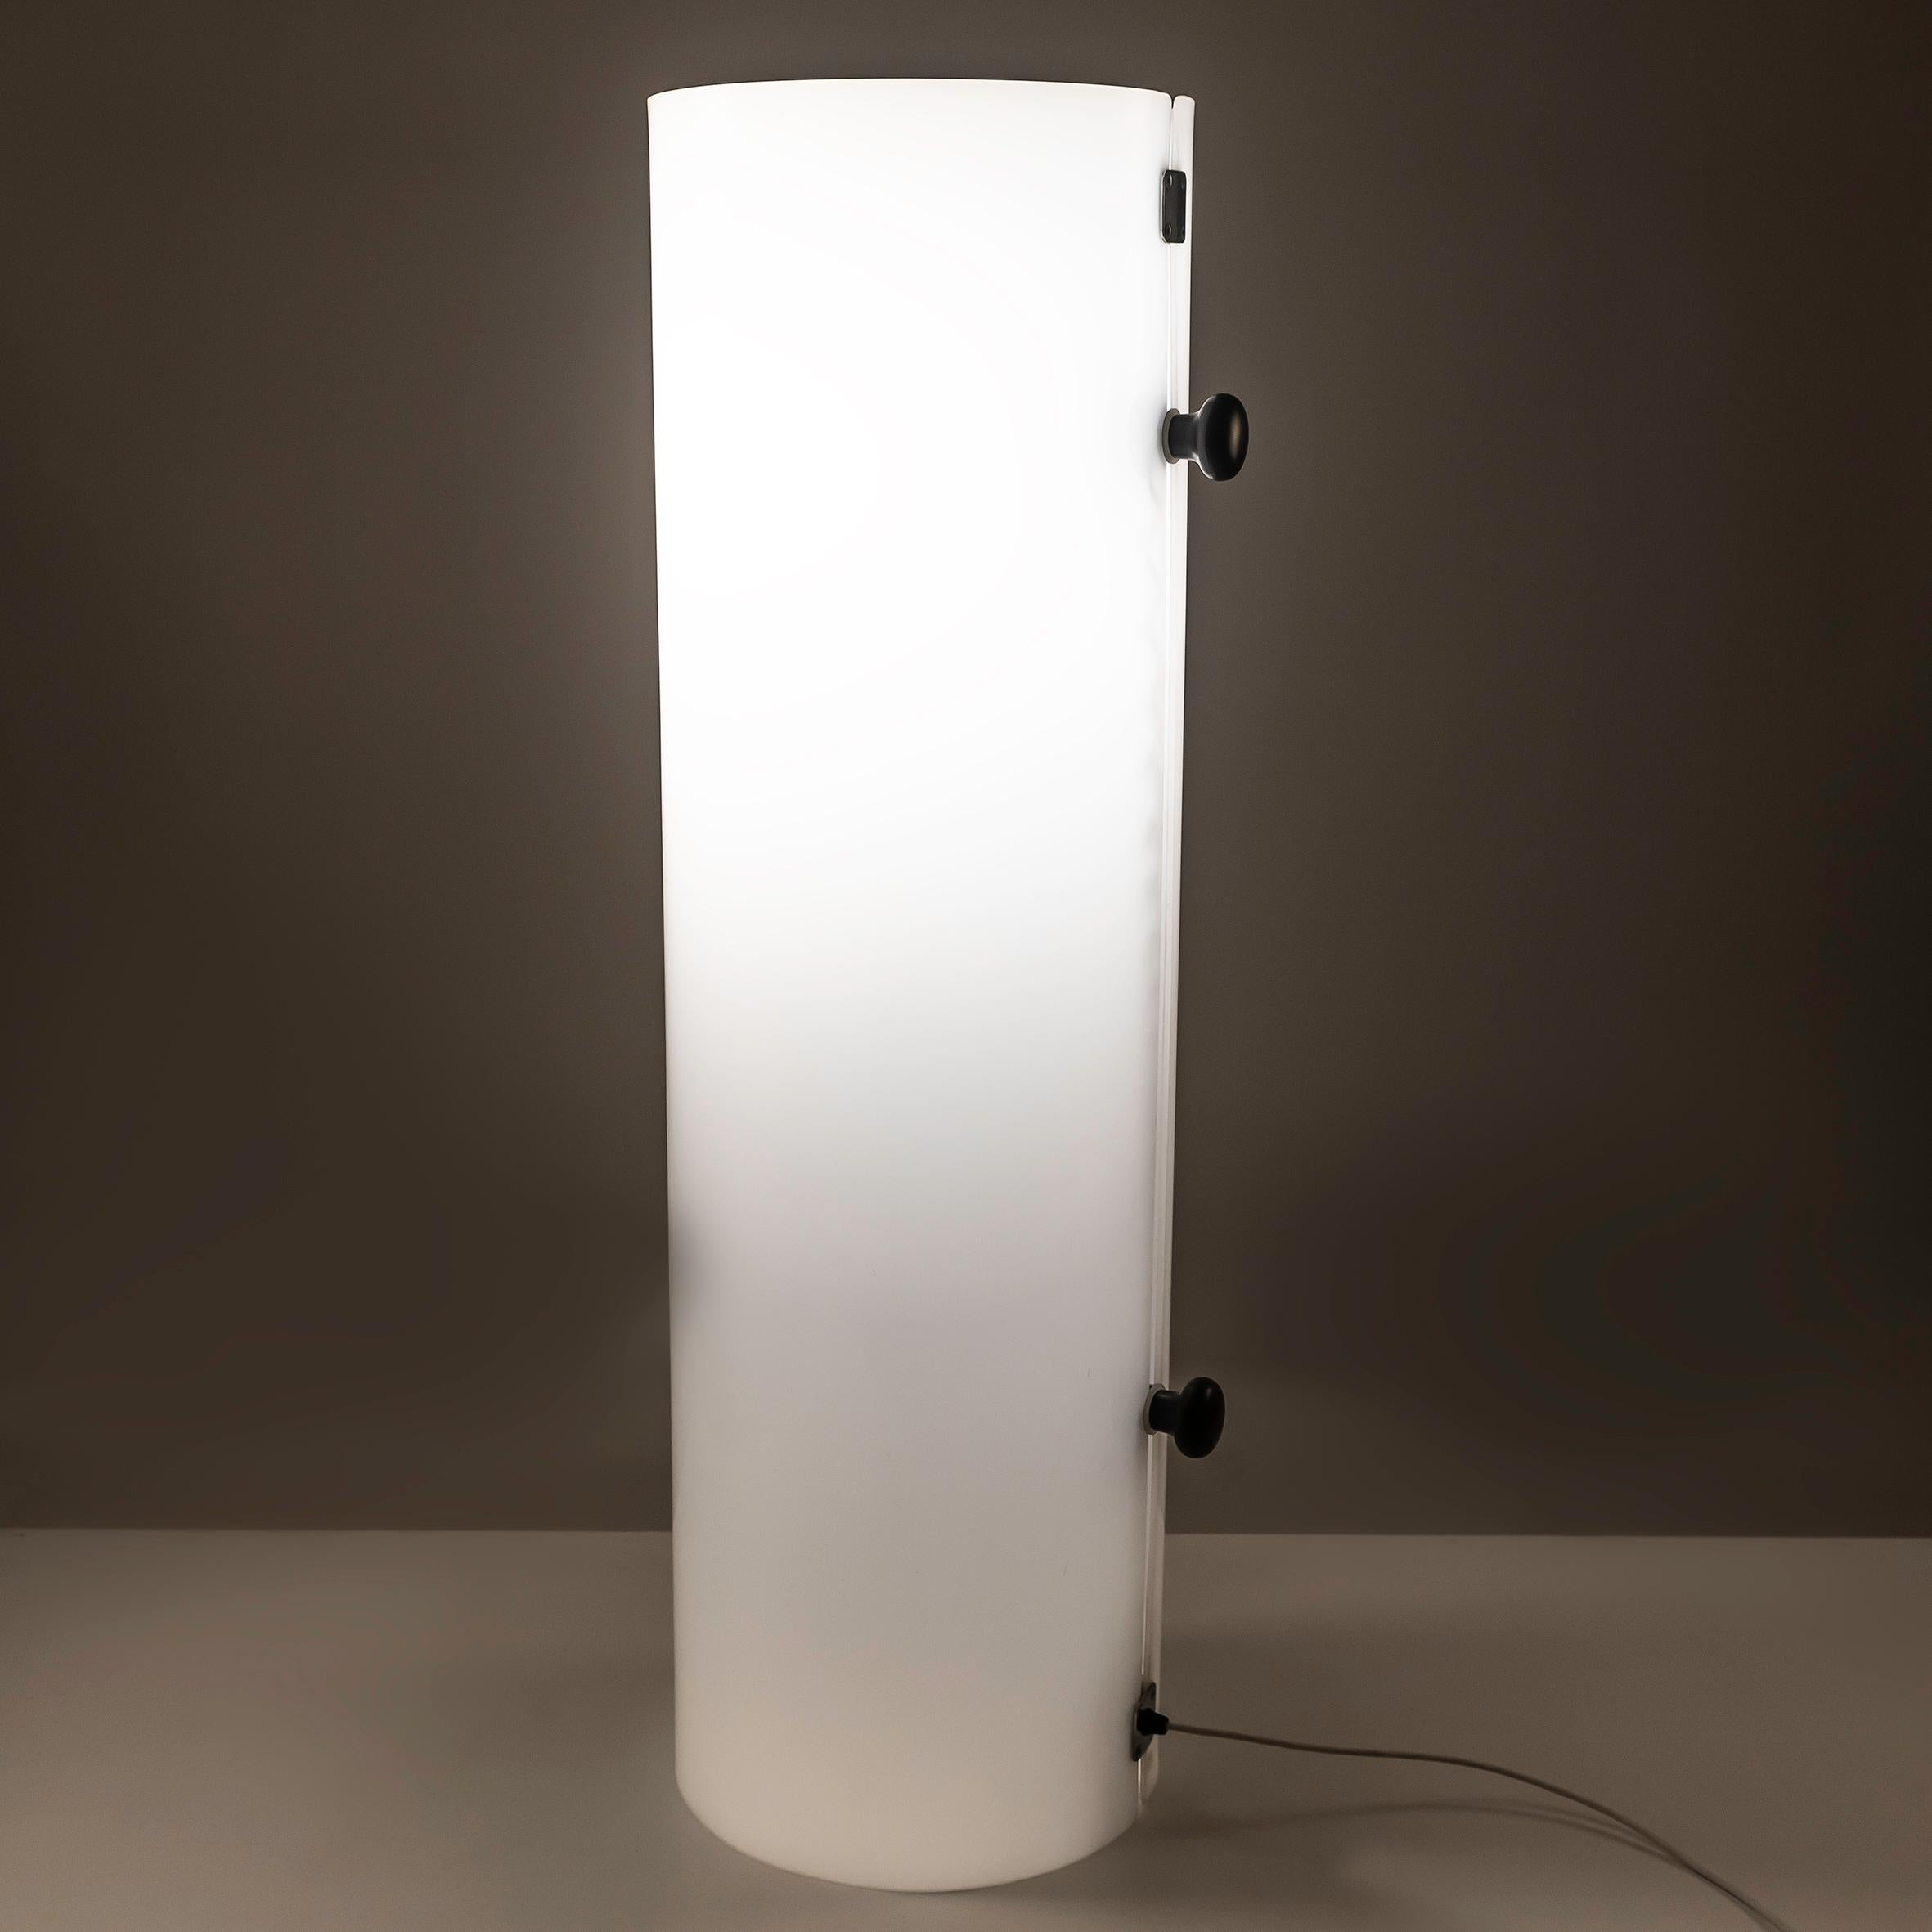 Mid-20th Century Large Cylindrical Floor Lamp by Joan Antoni Blanc for Tramo, Spain 1960s For Sale